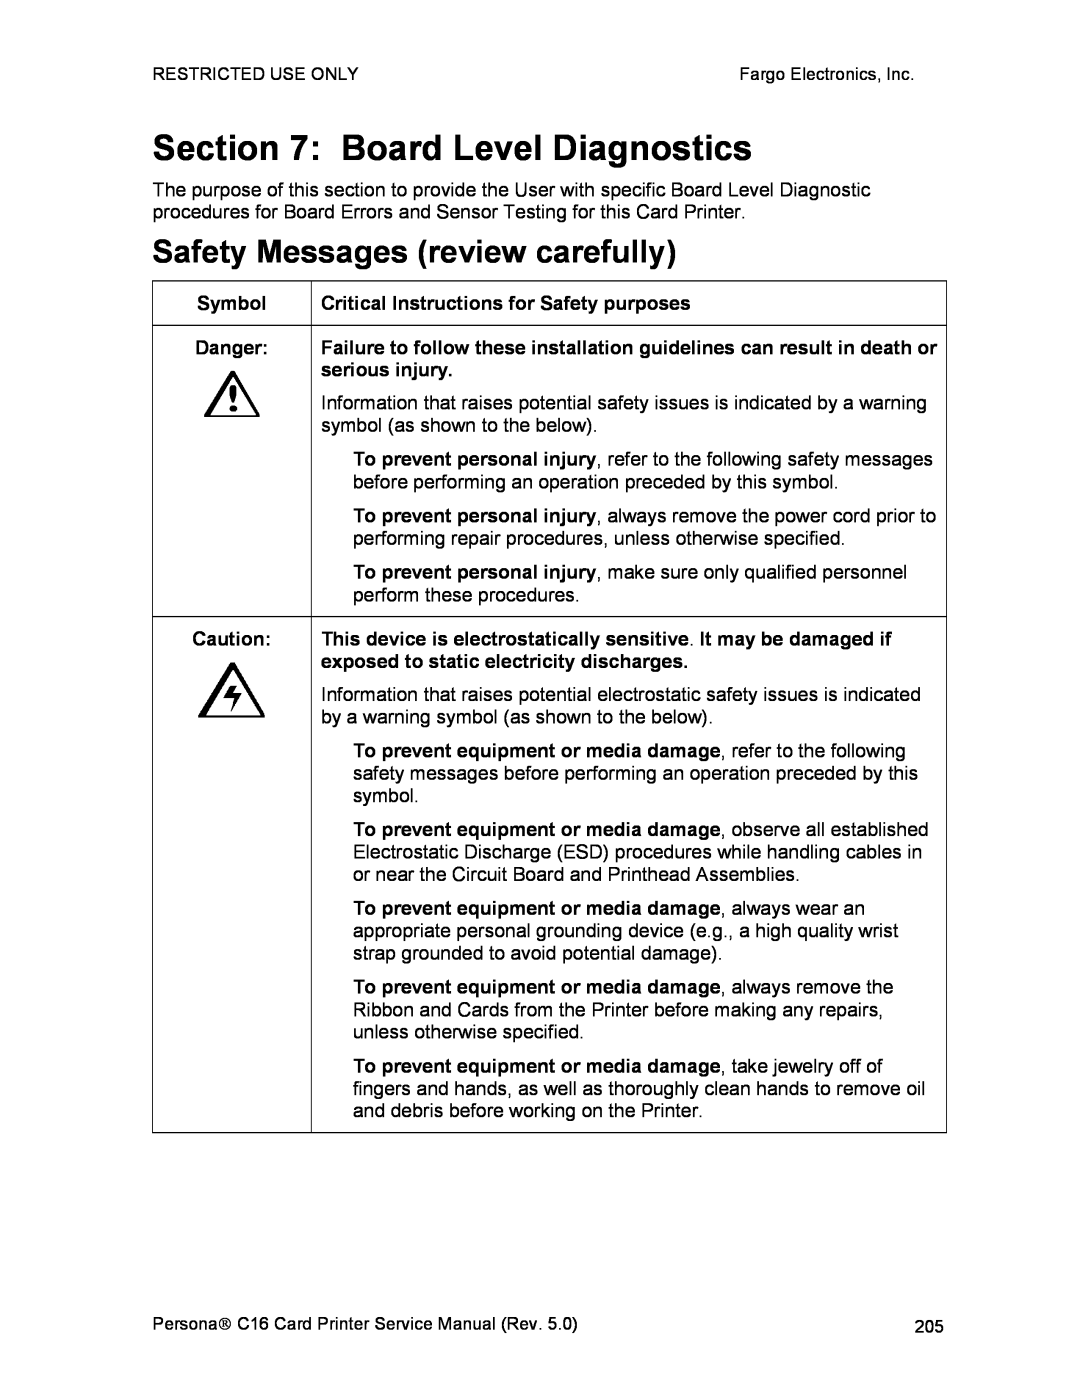 FARGO electronic C16 service manual Board Level Diagnostics, Safety Messages review carefully 